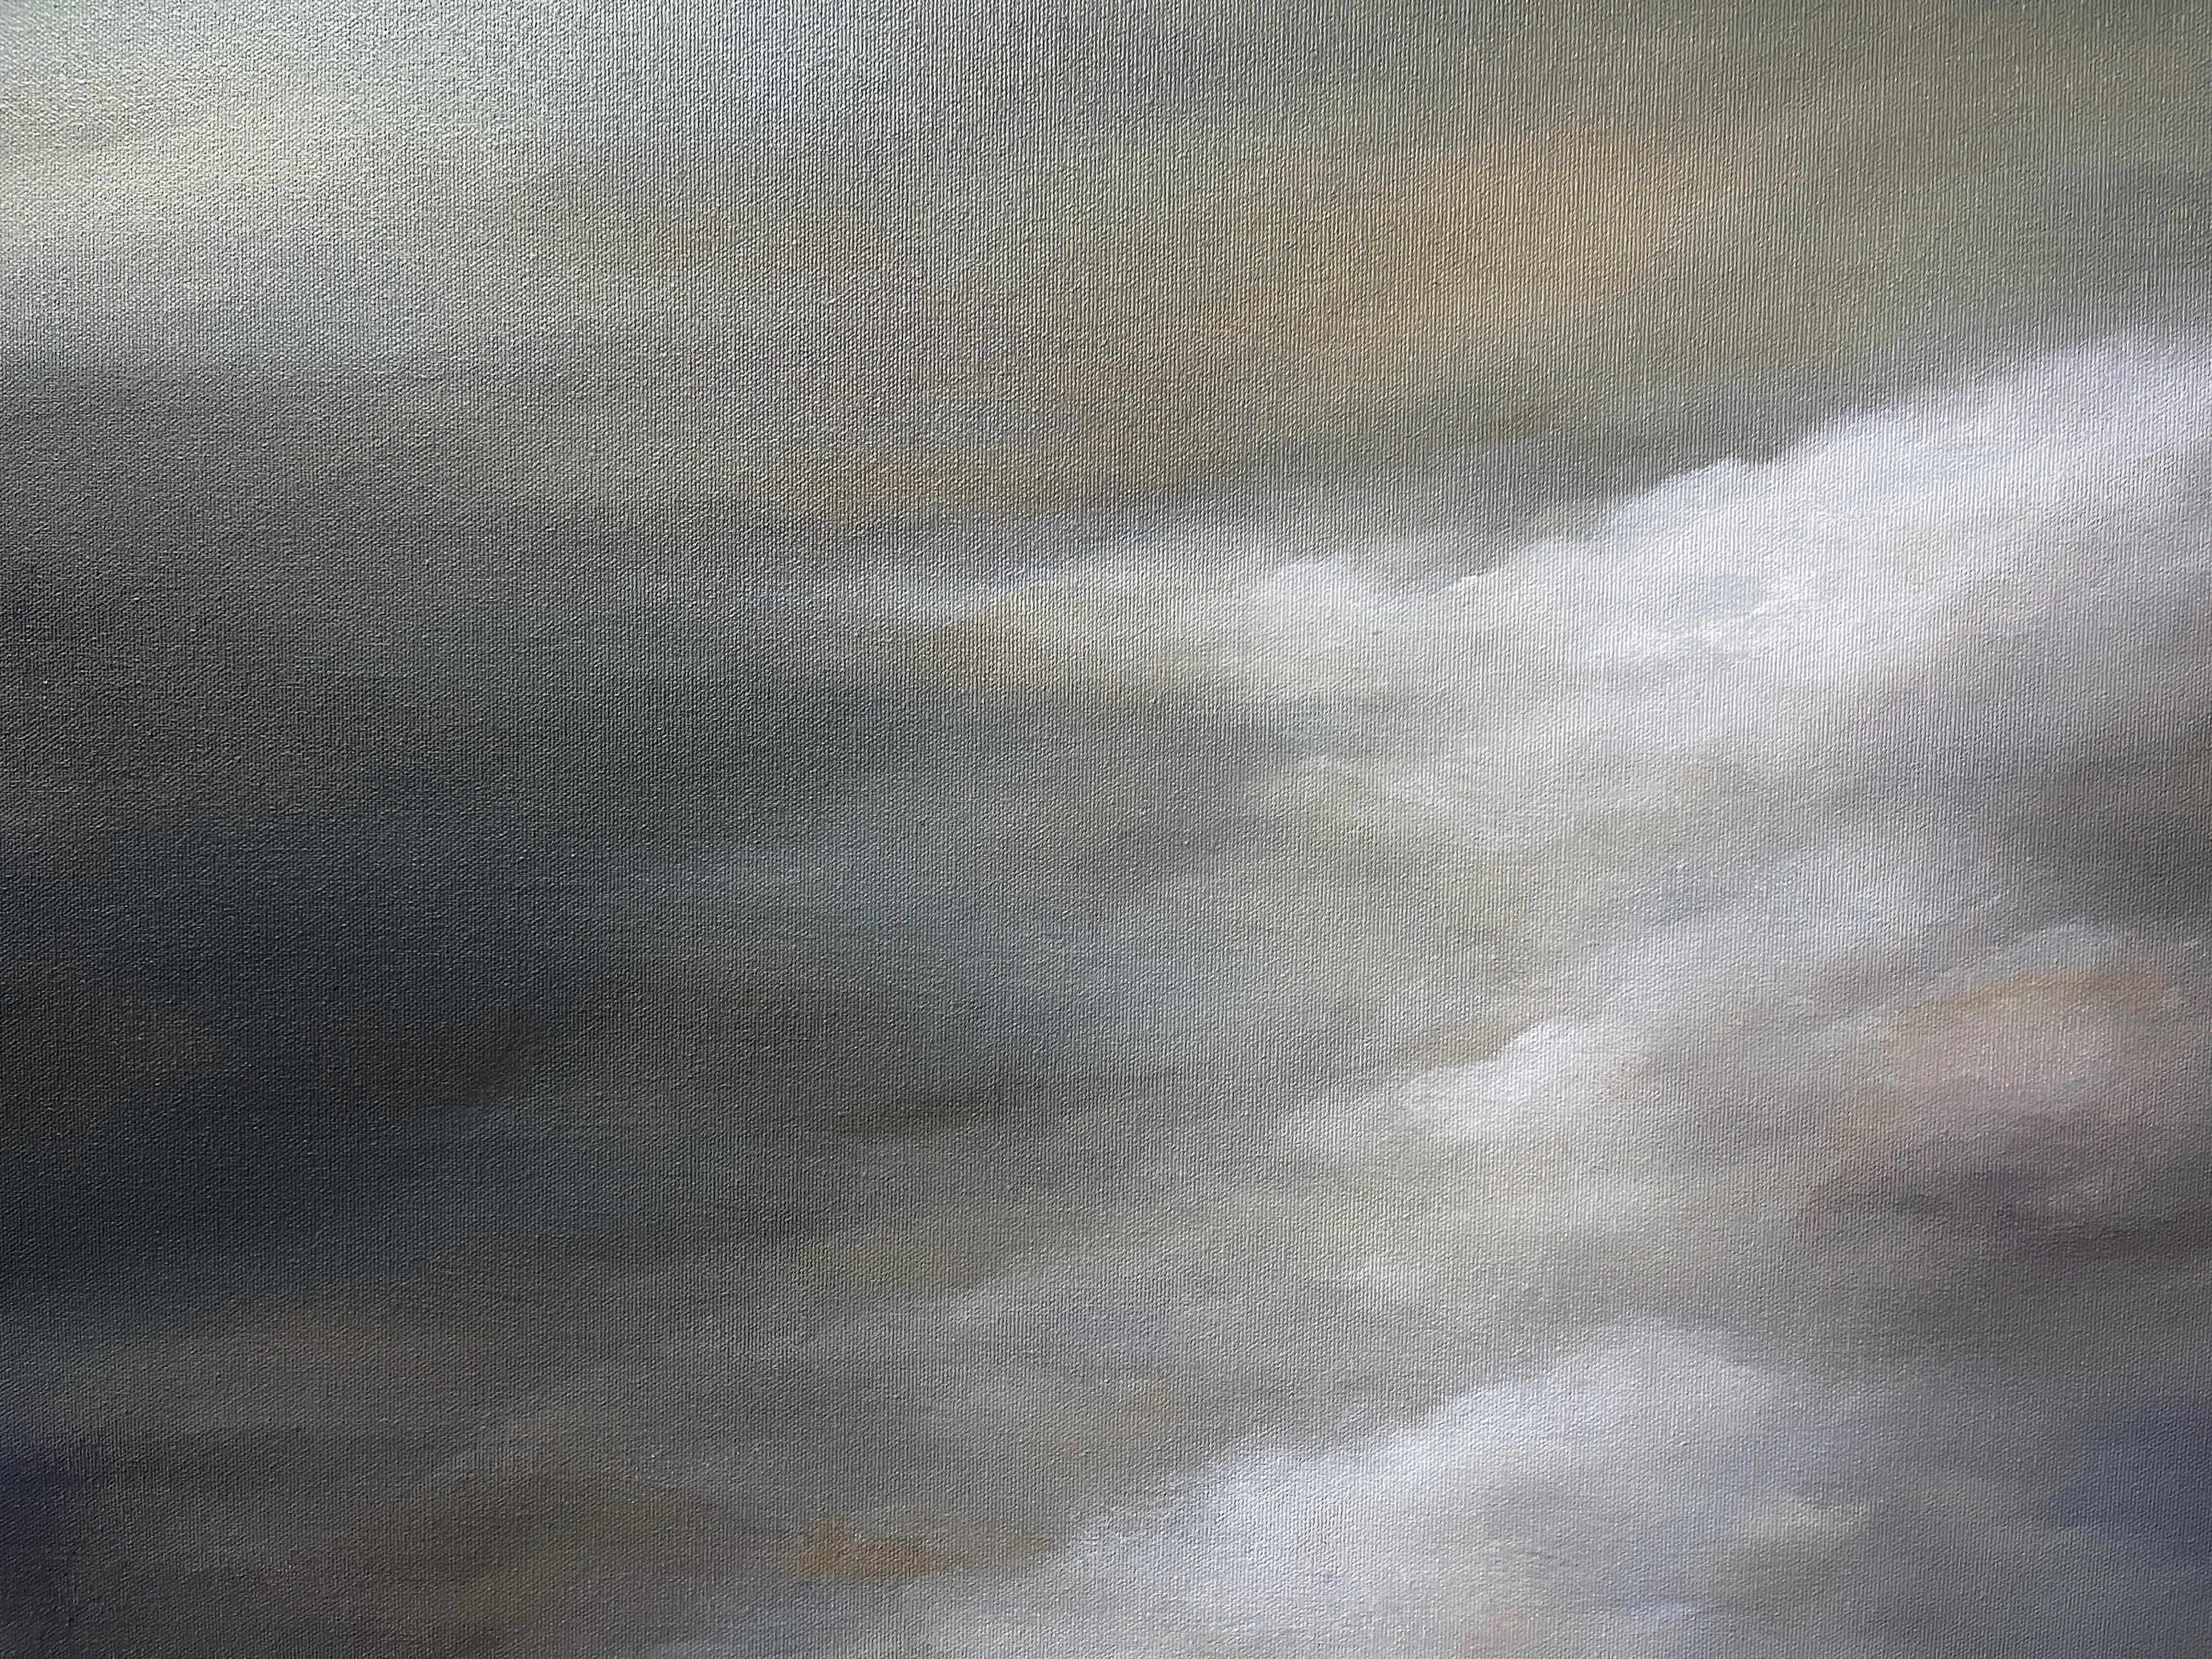 Ascending Light - Original Oil Painting with Dramatic Sky and Landscape - Gray Landscape Painting by Ahzad Bogosian